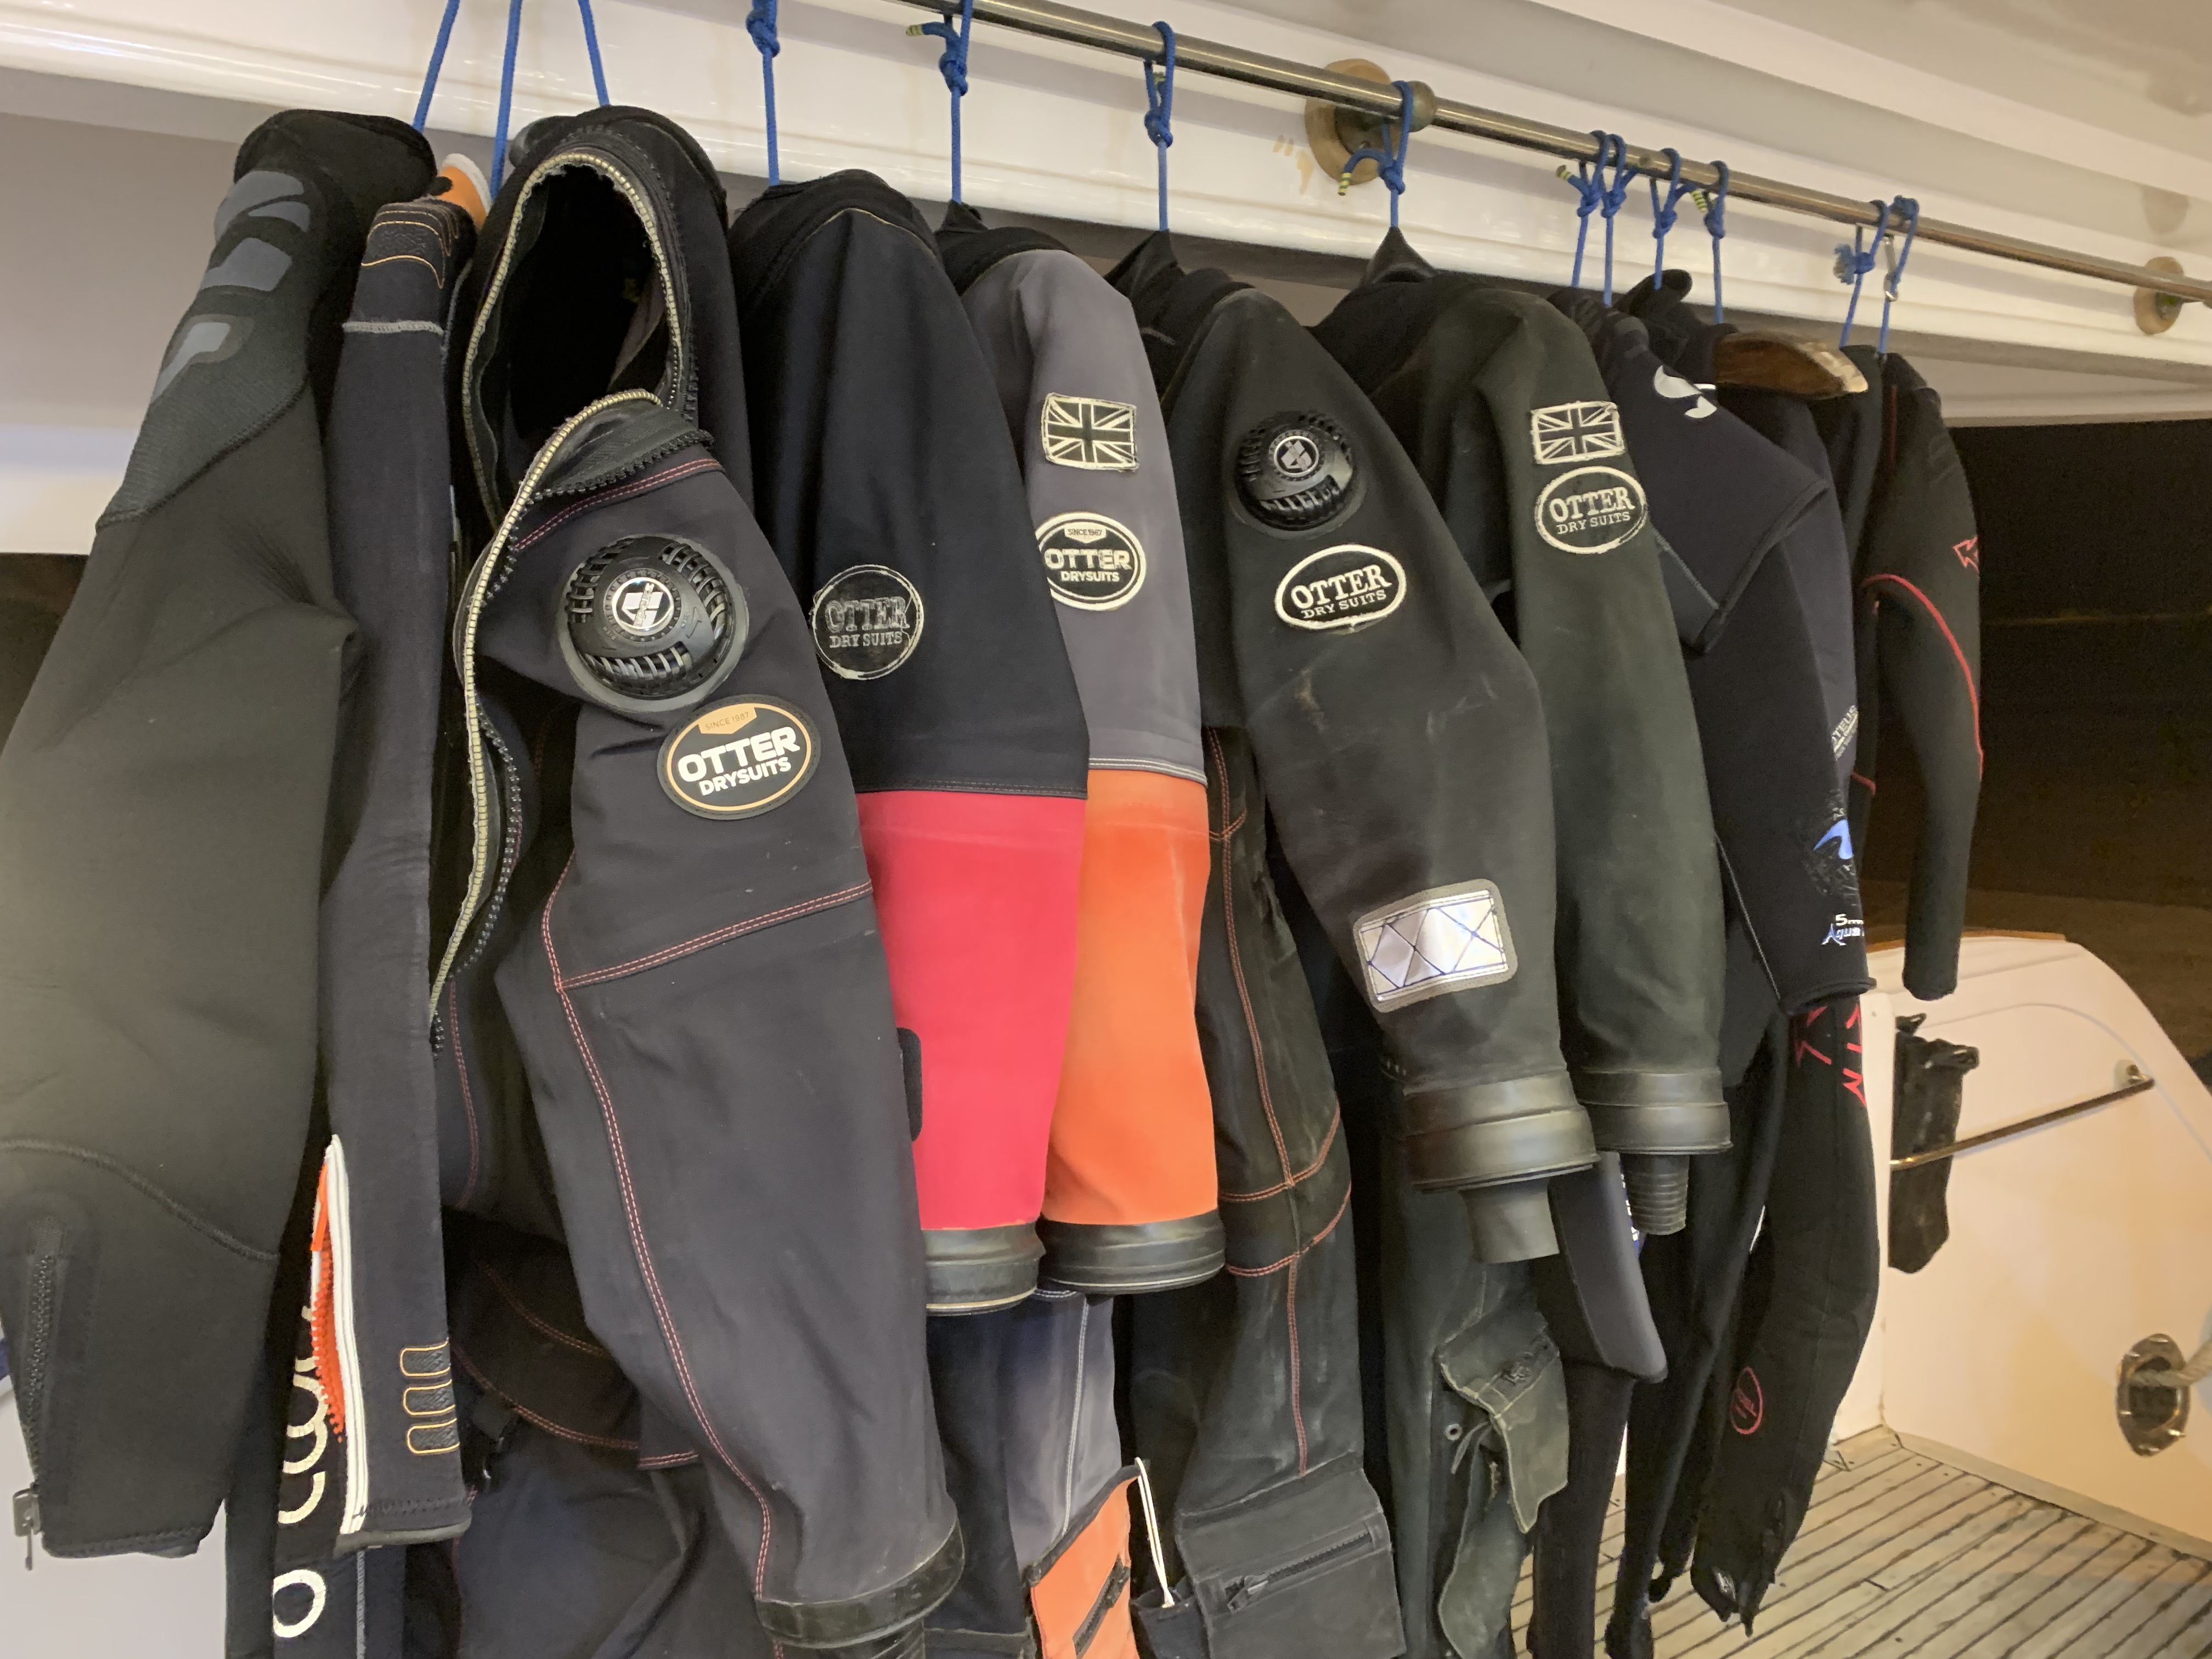 Otter dry suits ready for diving in the Red Sea, Egypt